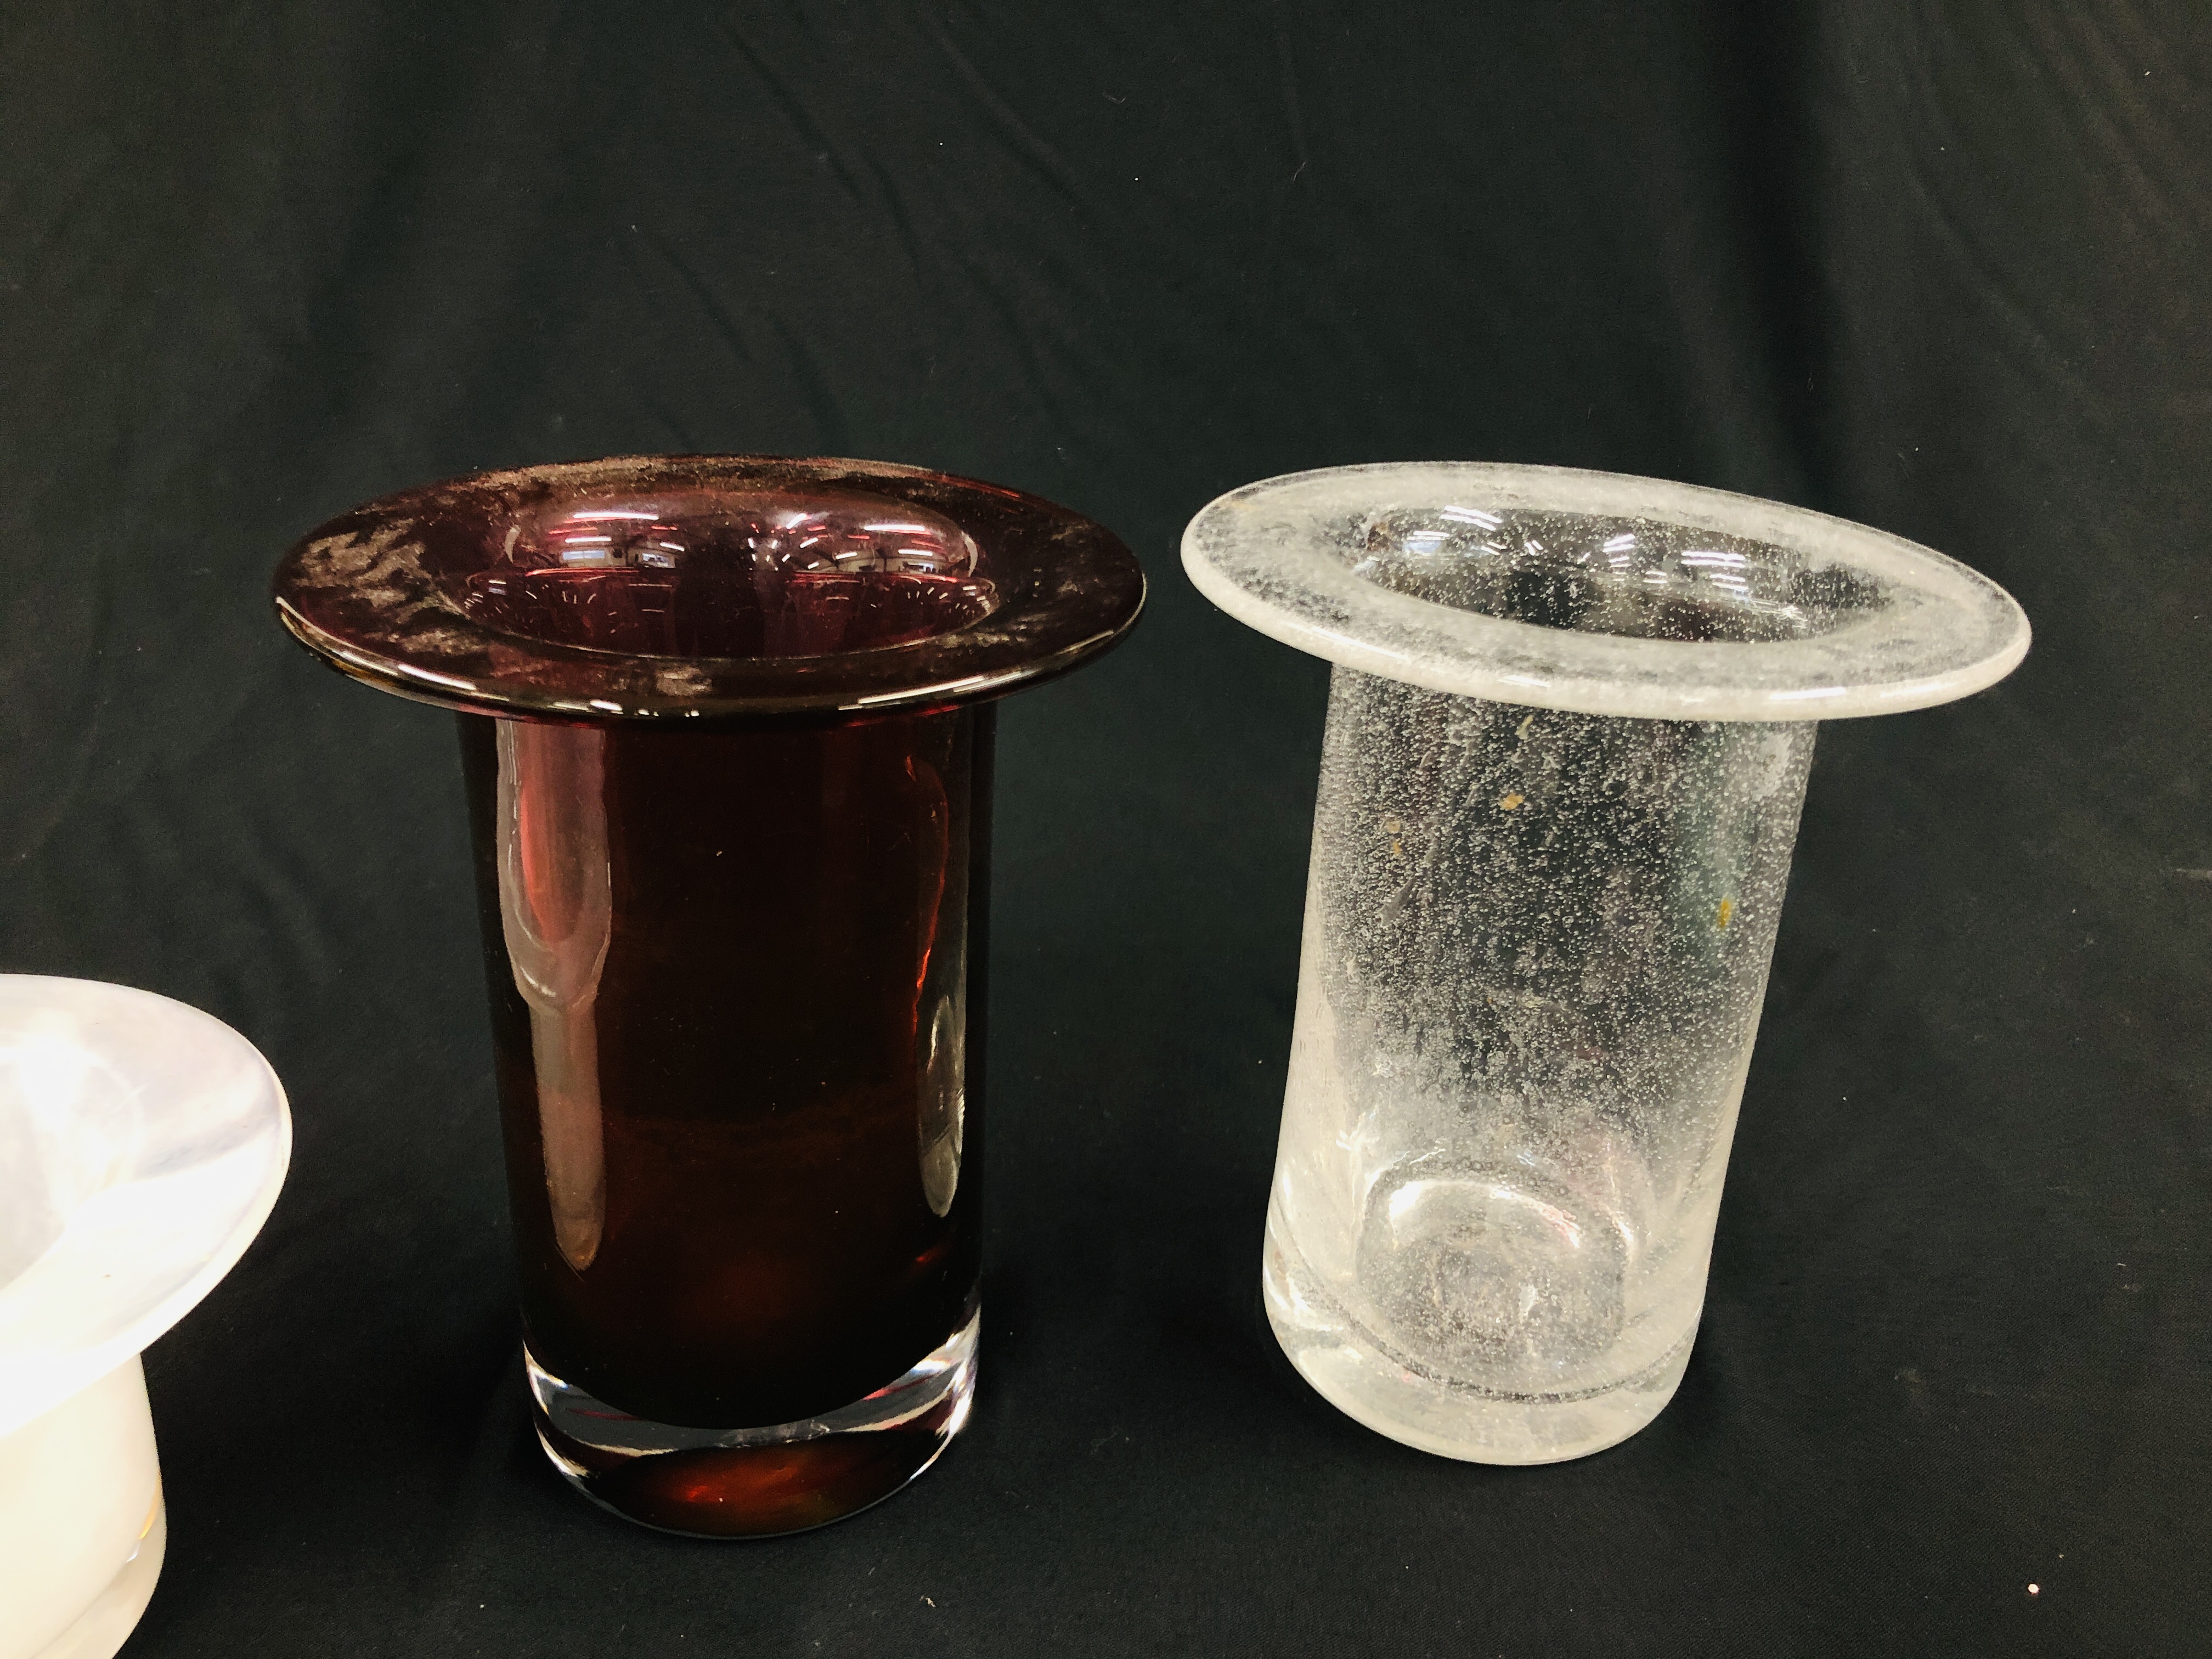 TWO ART GLASS STUDIO VASES, TOP HAT DESIGN, ONE CLEAR GLASS WITH A BUBBLE EFFECT, - Image 5 of 6